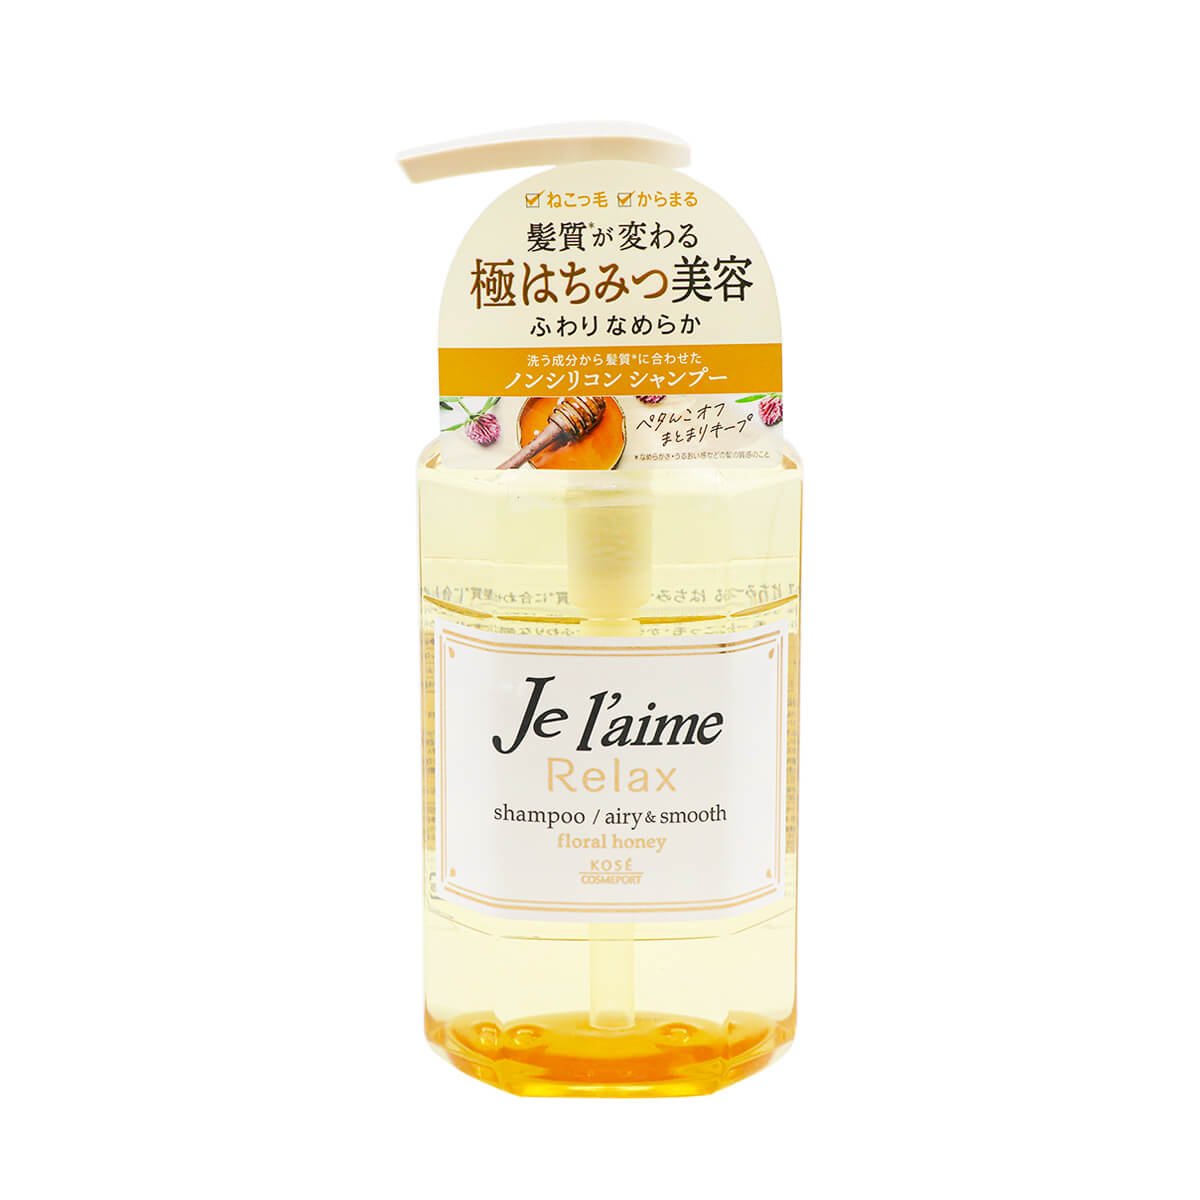 Kose Je L'aime Relax Airy & Smooth Shampoo Floral Honey 500ml